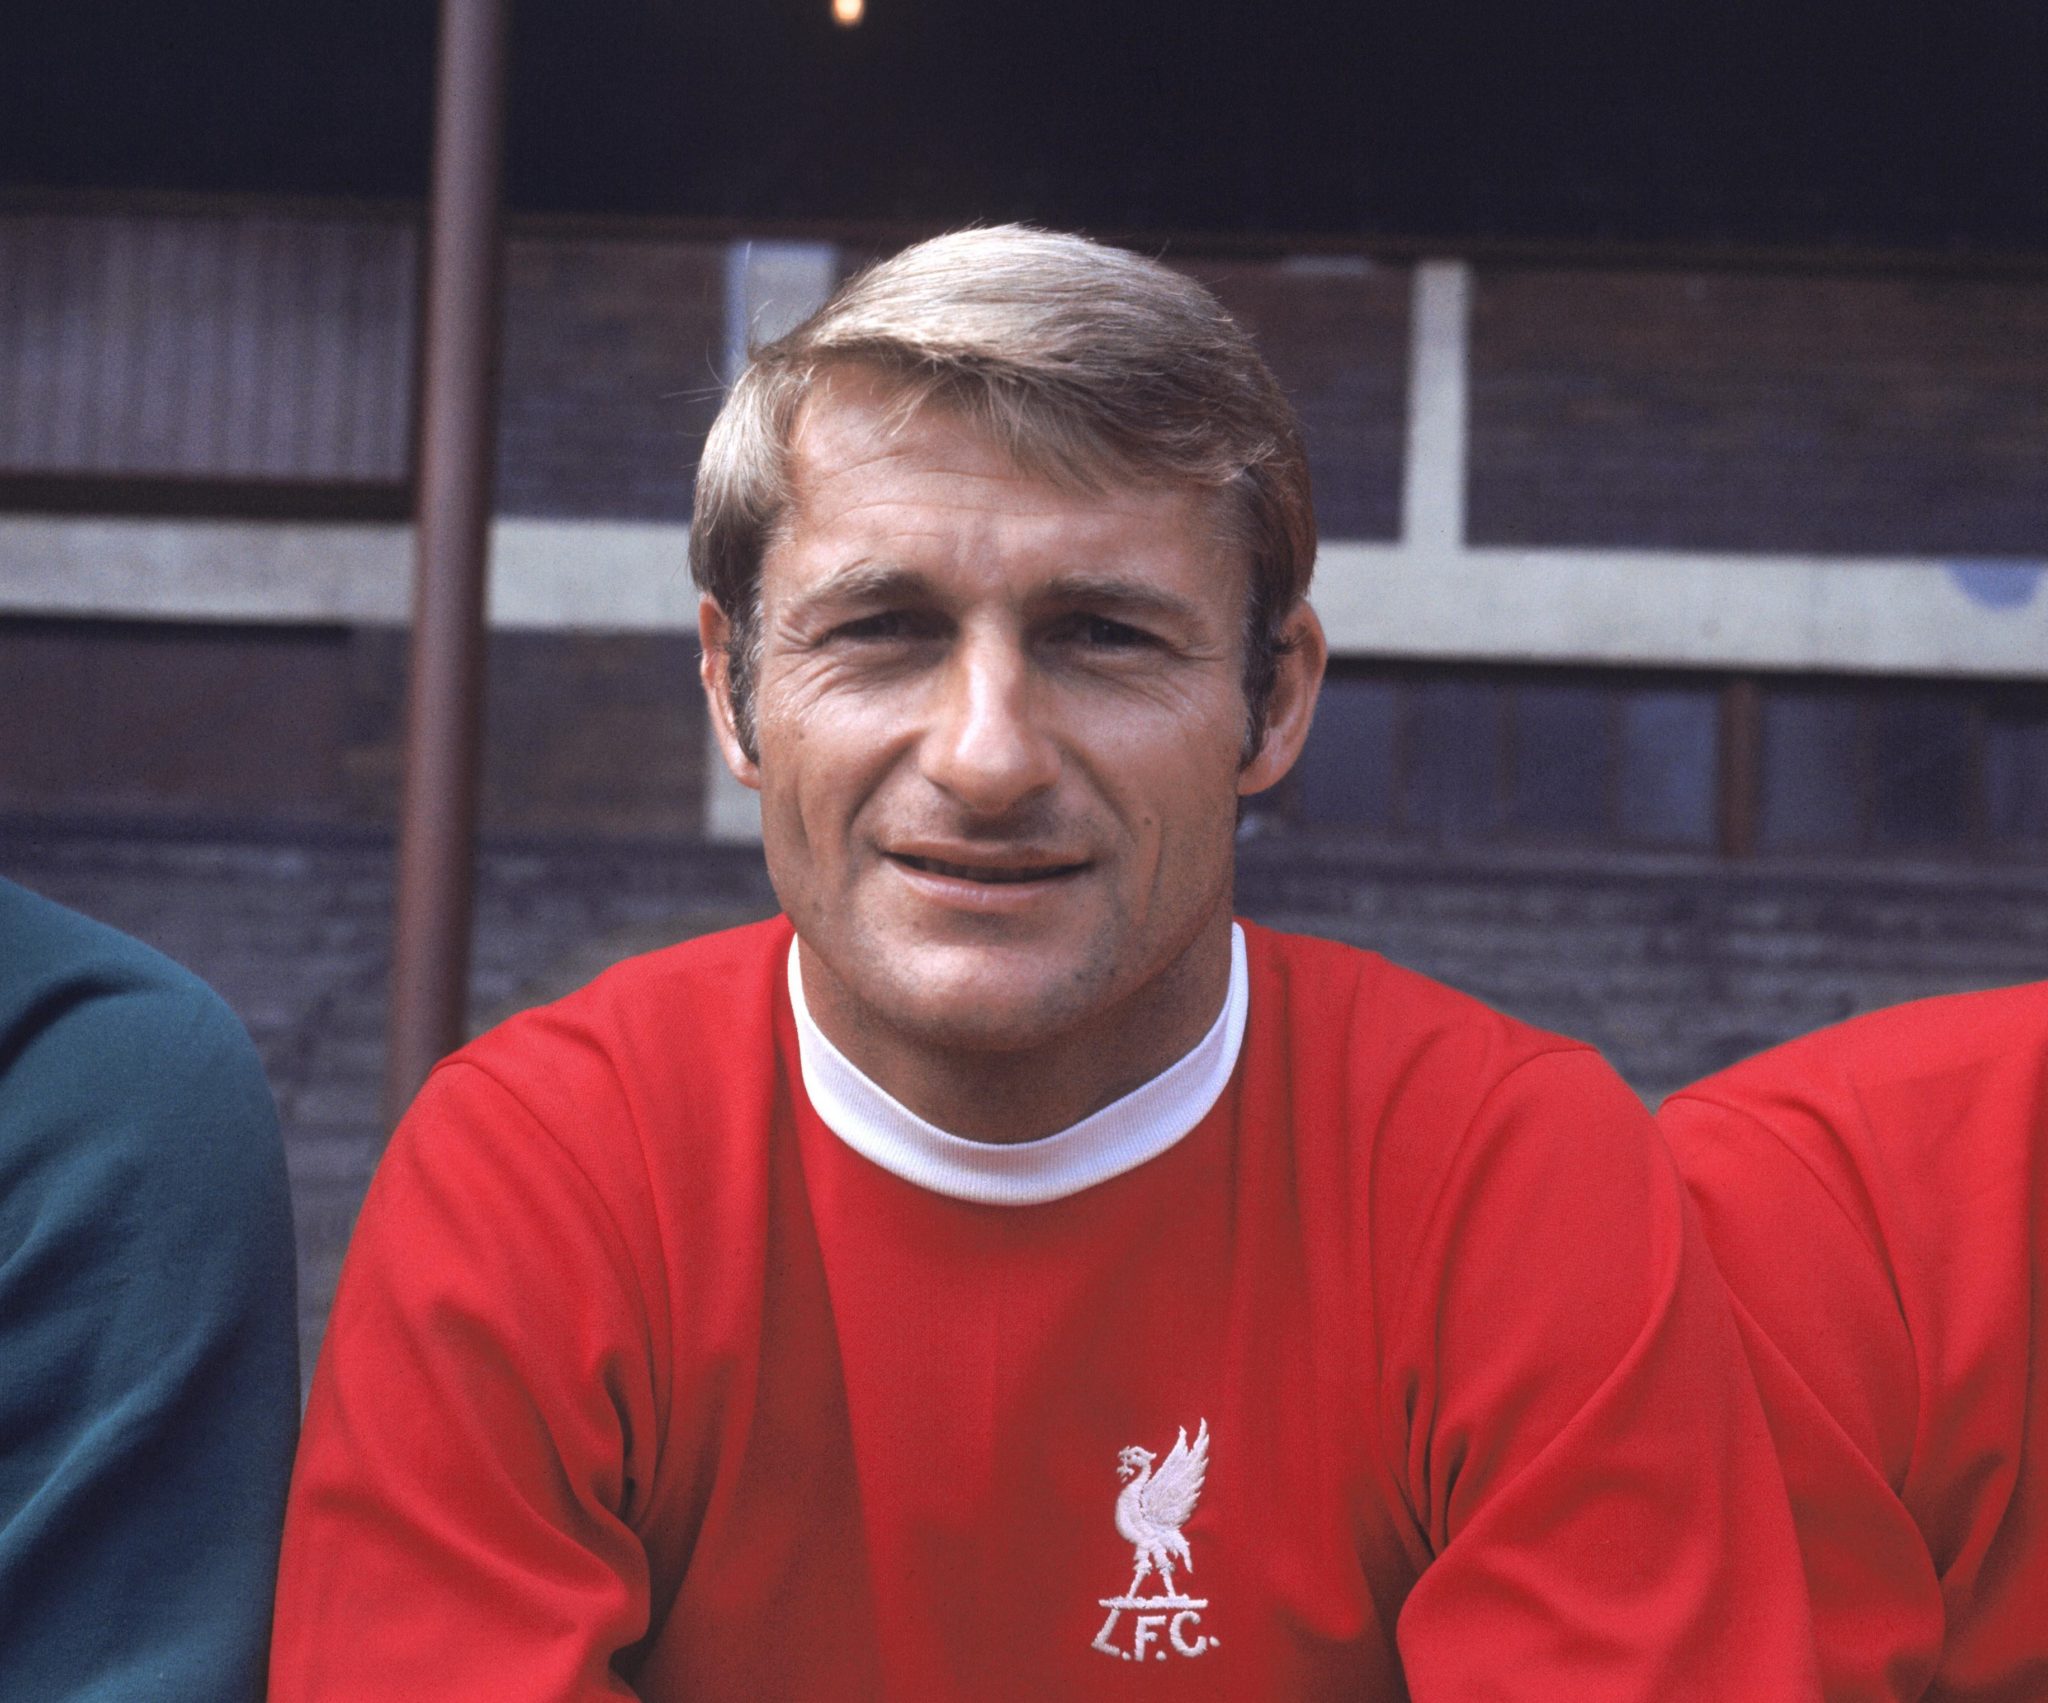 Liverpool legend Roger Hunt has died at the age of 83